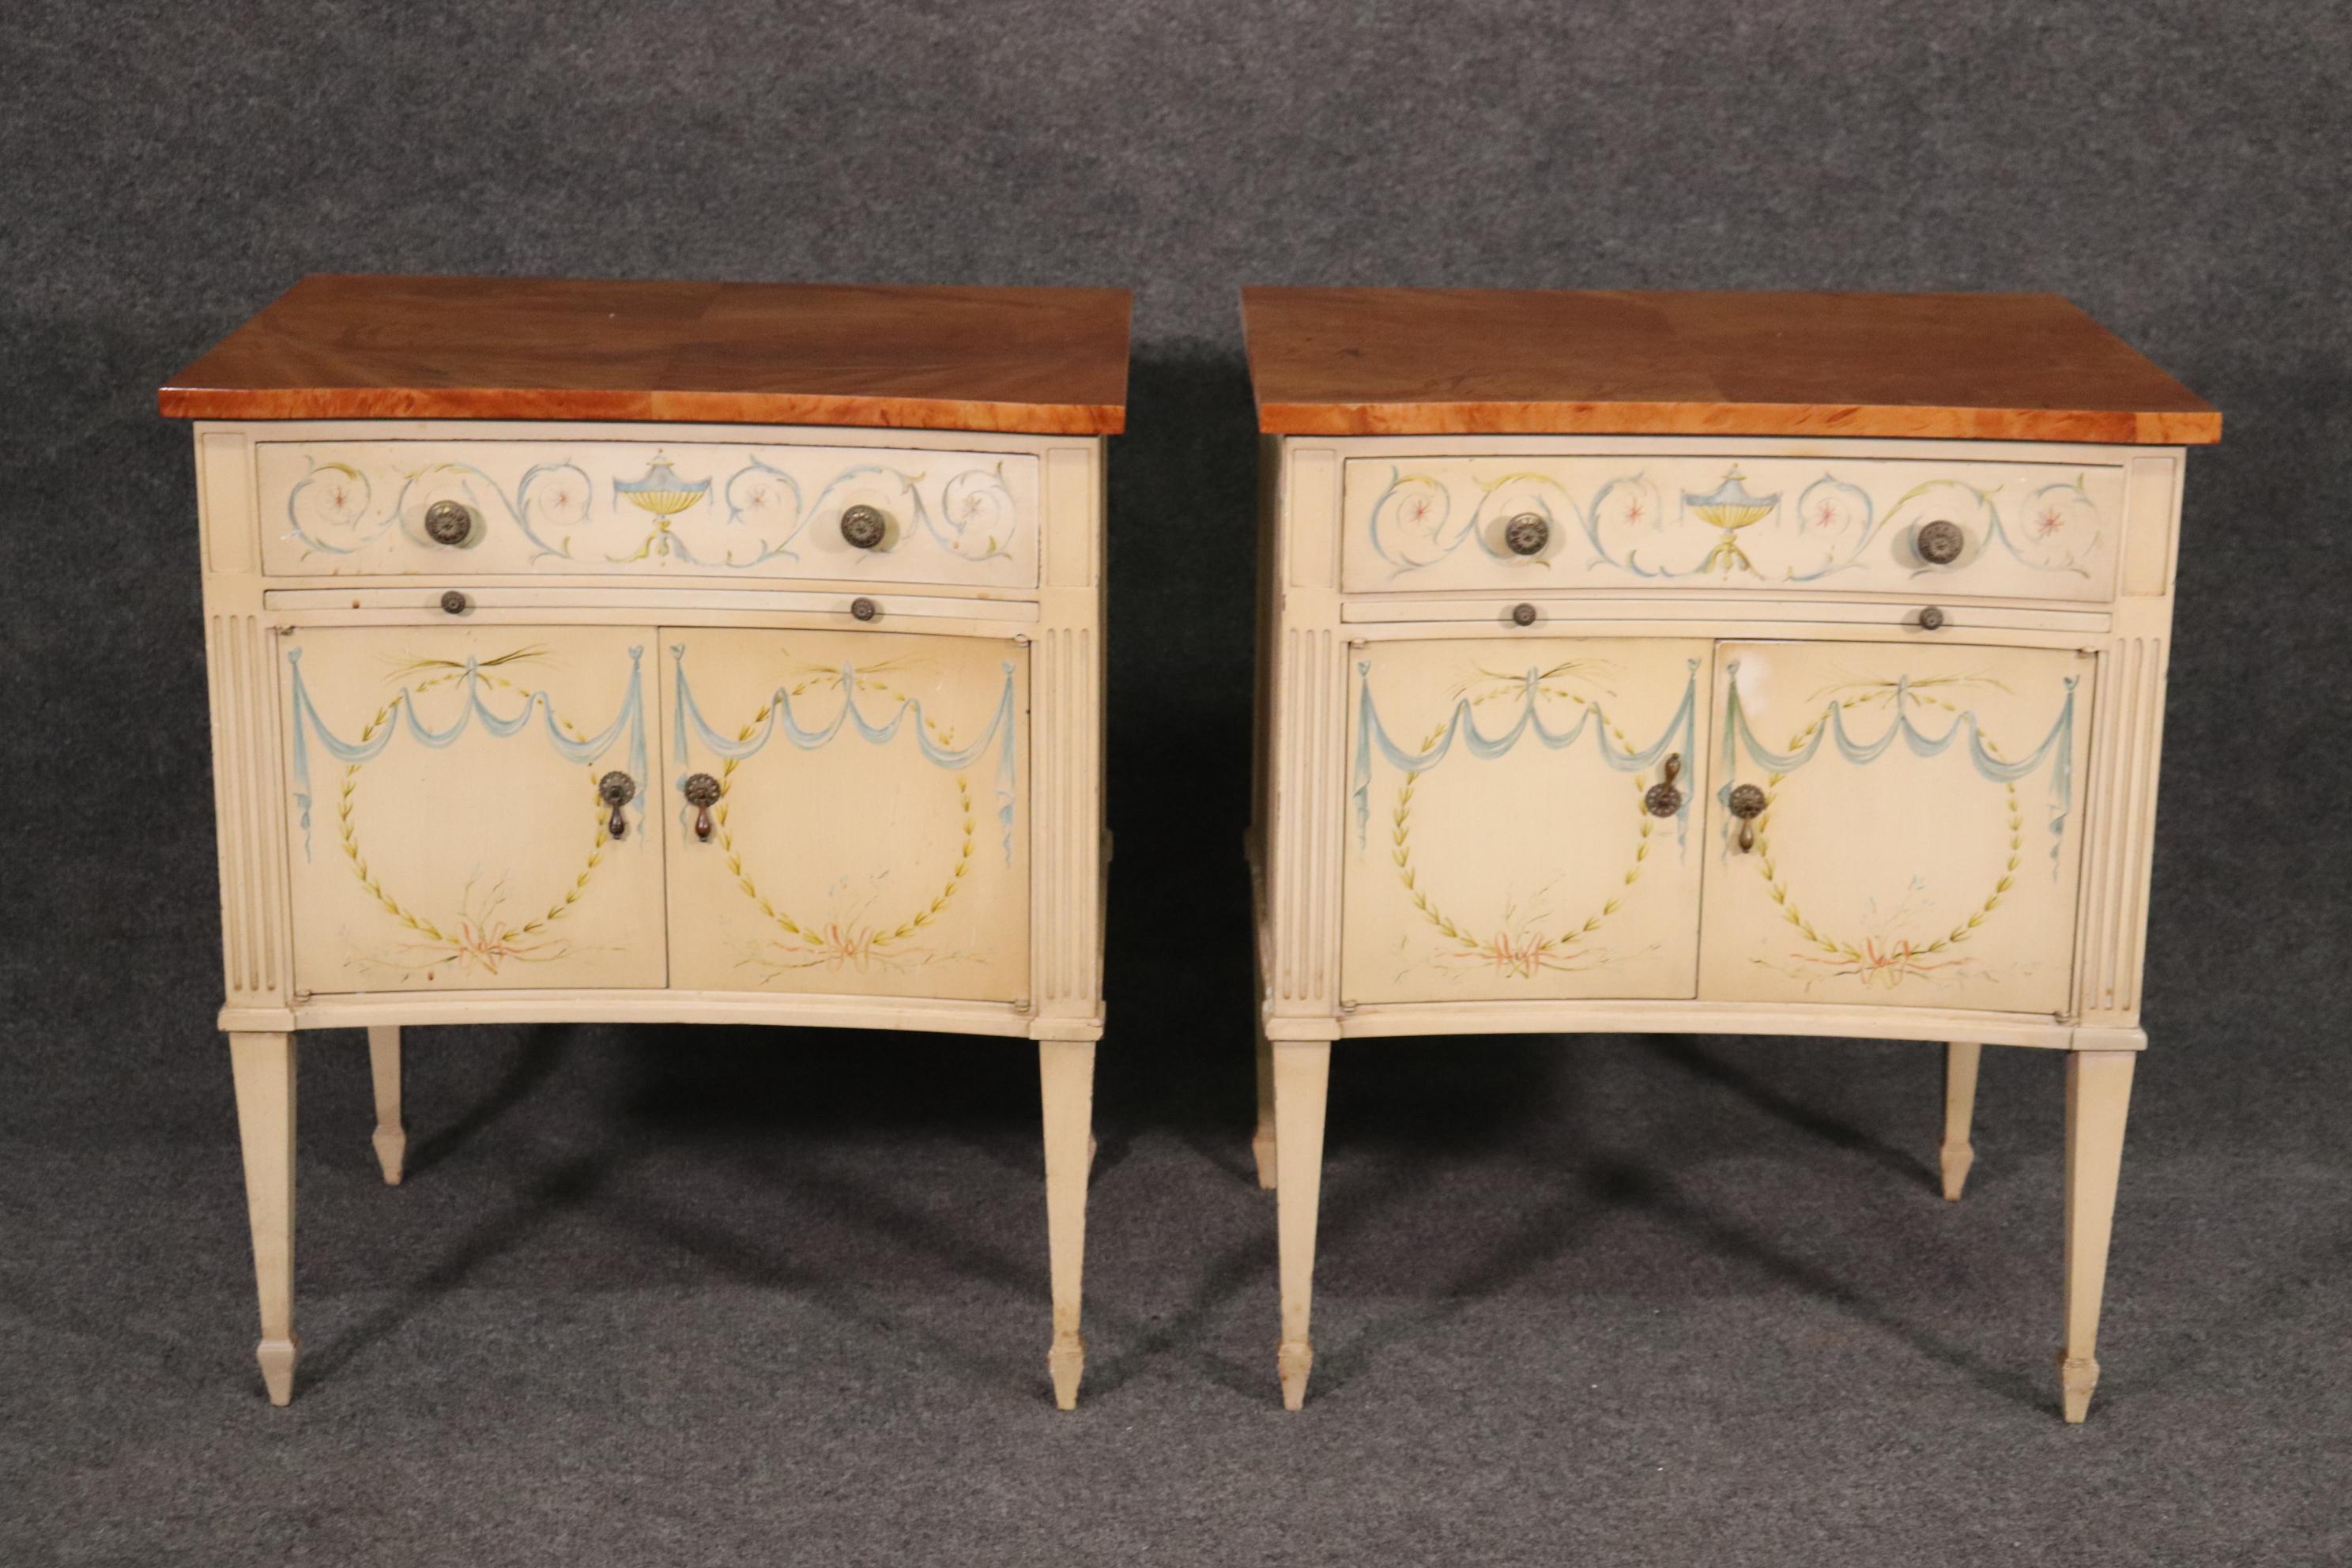 This is a fantastic pair of absolutely gorgeous hand-painted Adams style night stands with beautiful burled walnut tops. The stands are made of the highest quality and just gorgeous. They measure 26 tall x 22 wide x 17 deep.